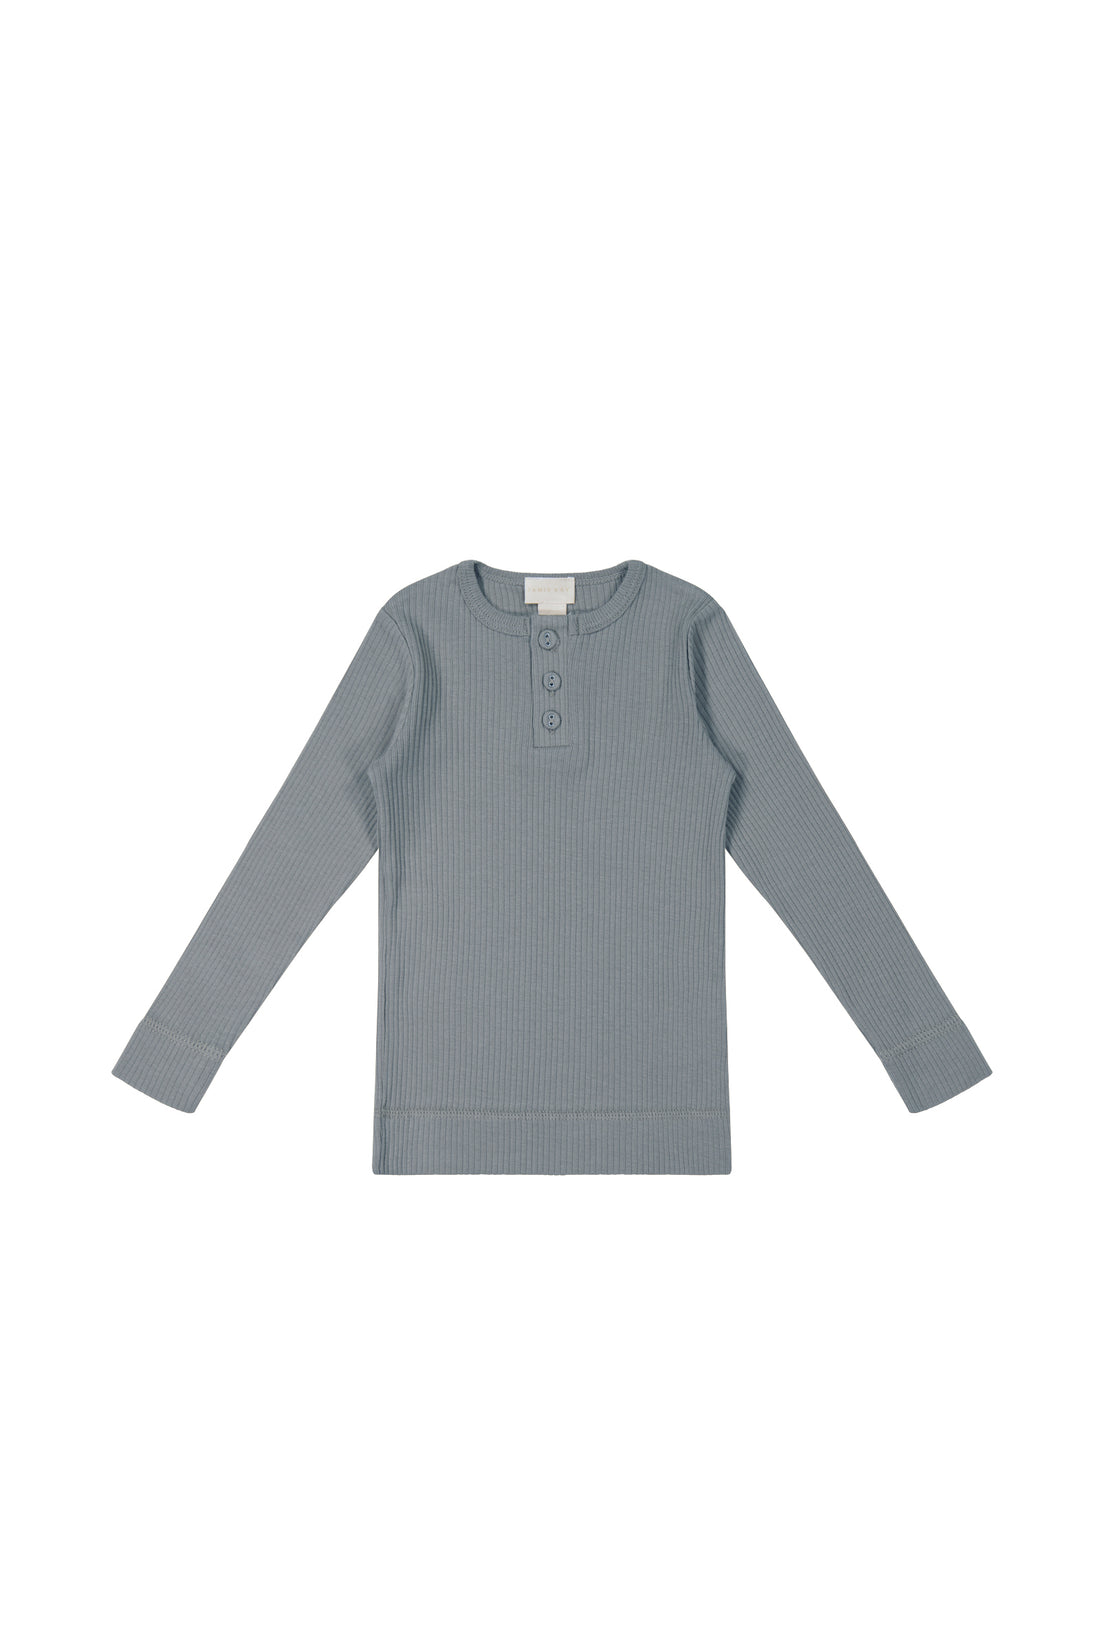 Organic Cotton Modal Long Sleeve Henley - Pebble Childrens Top from Jamie Kay NZ